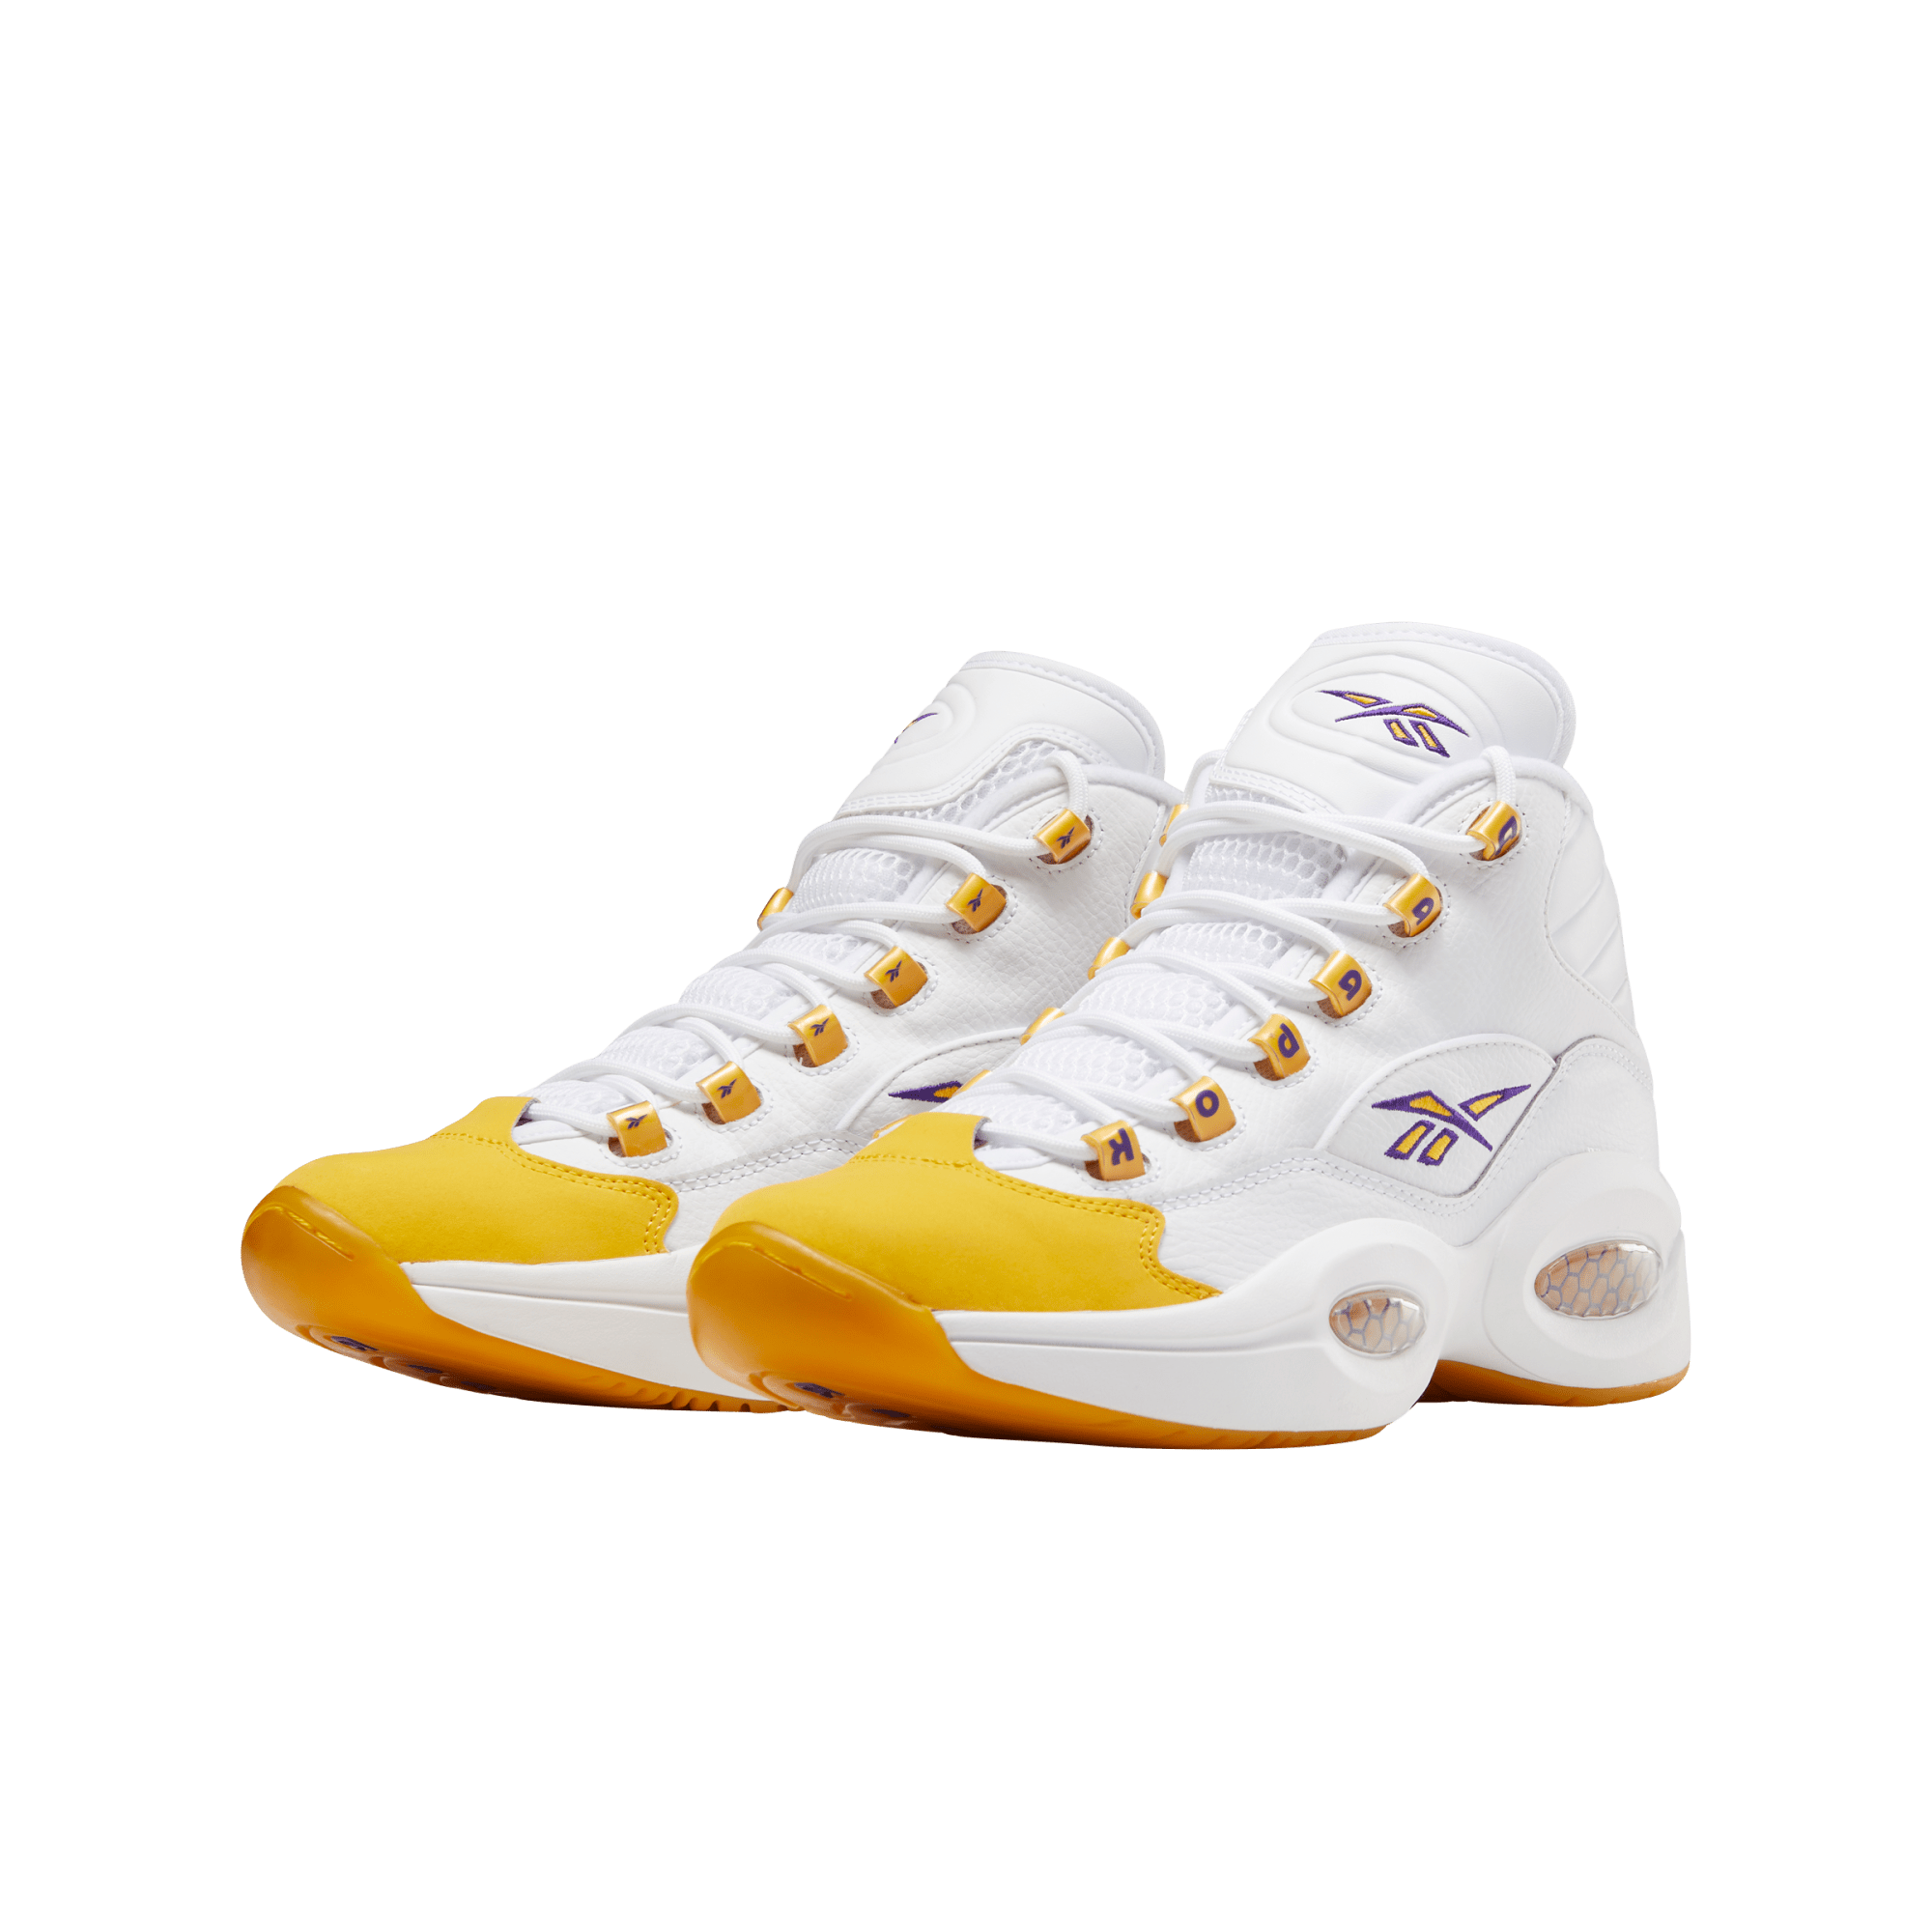 Reebok Mens Question Mid 'Yellow Toe' Shoes 9.5